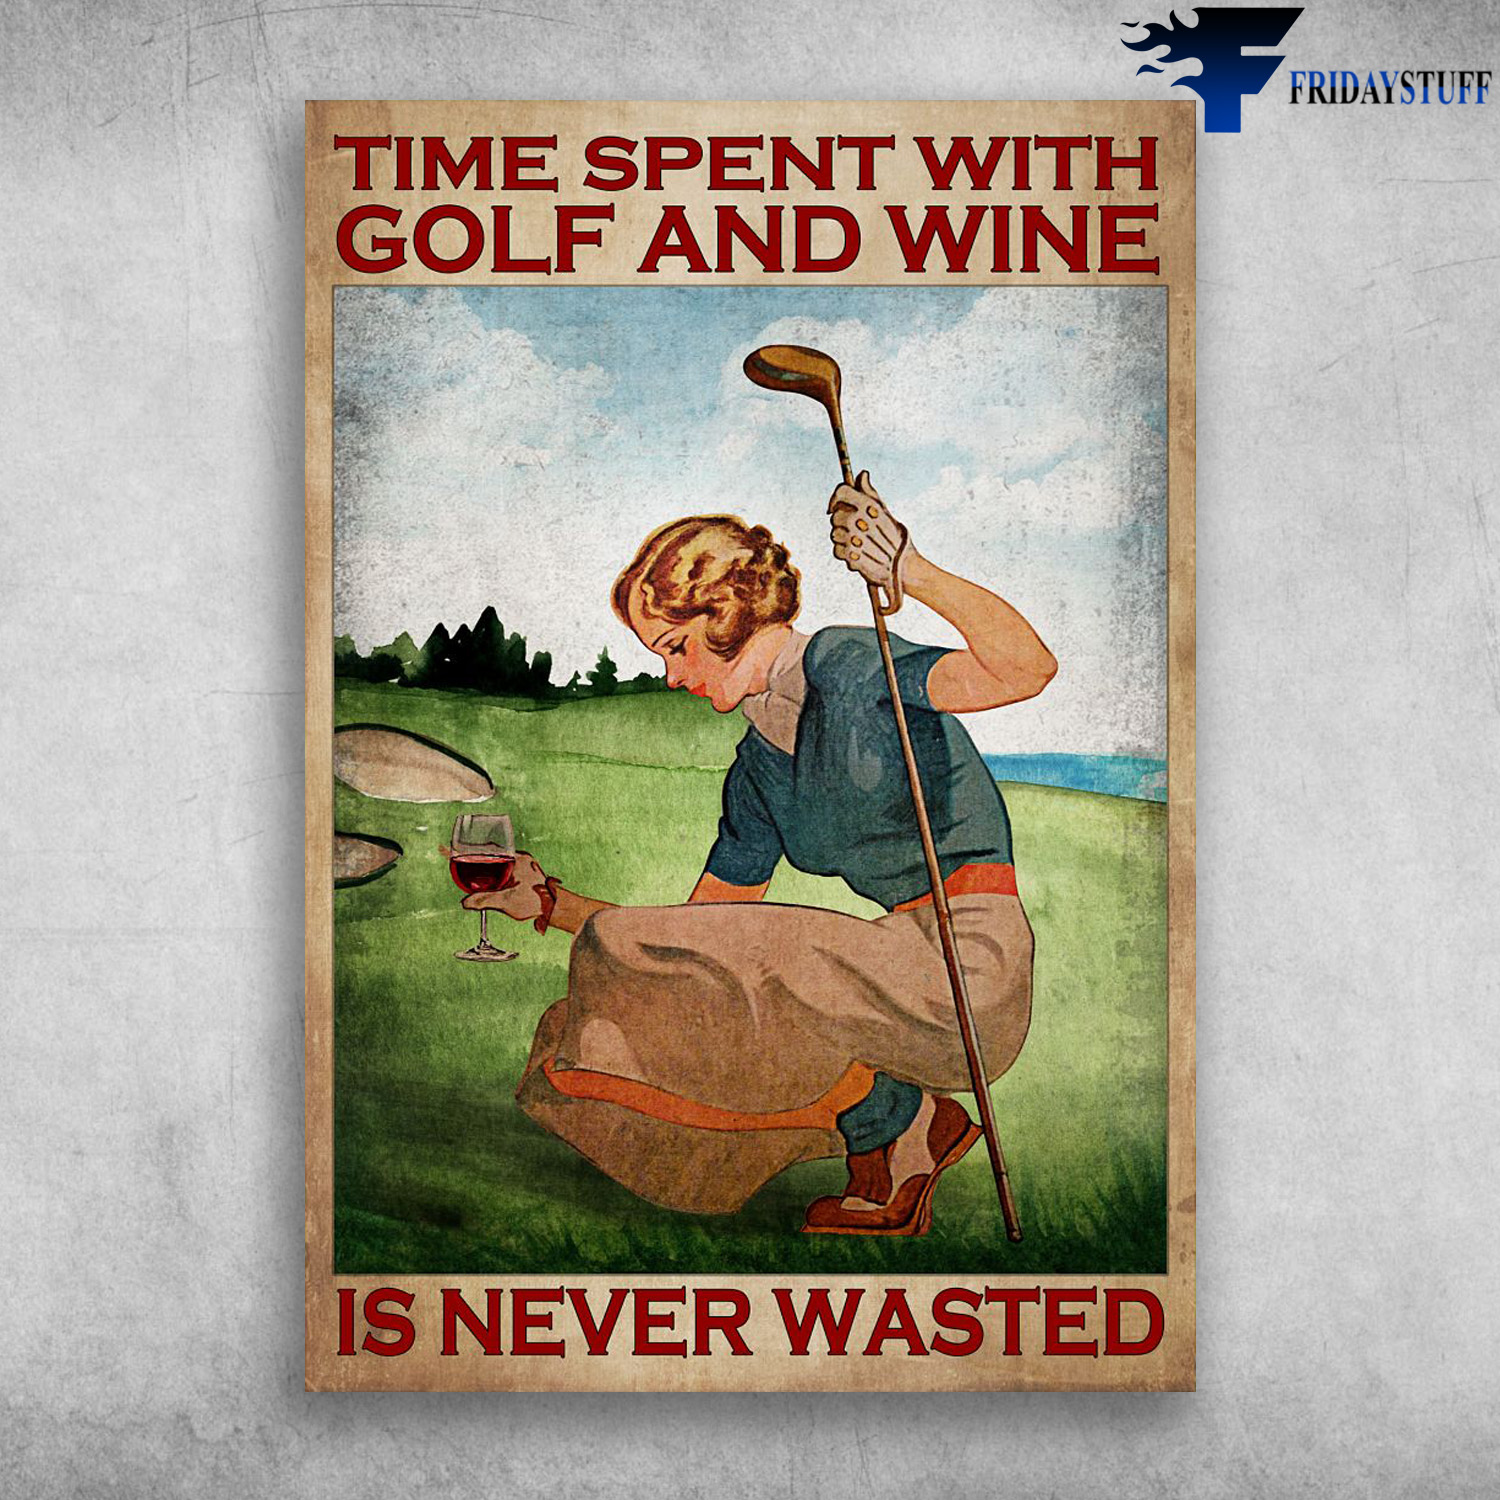 Girl Gold And Wine - Time Spent With Golf And Wine, Is Never Wasted